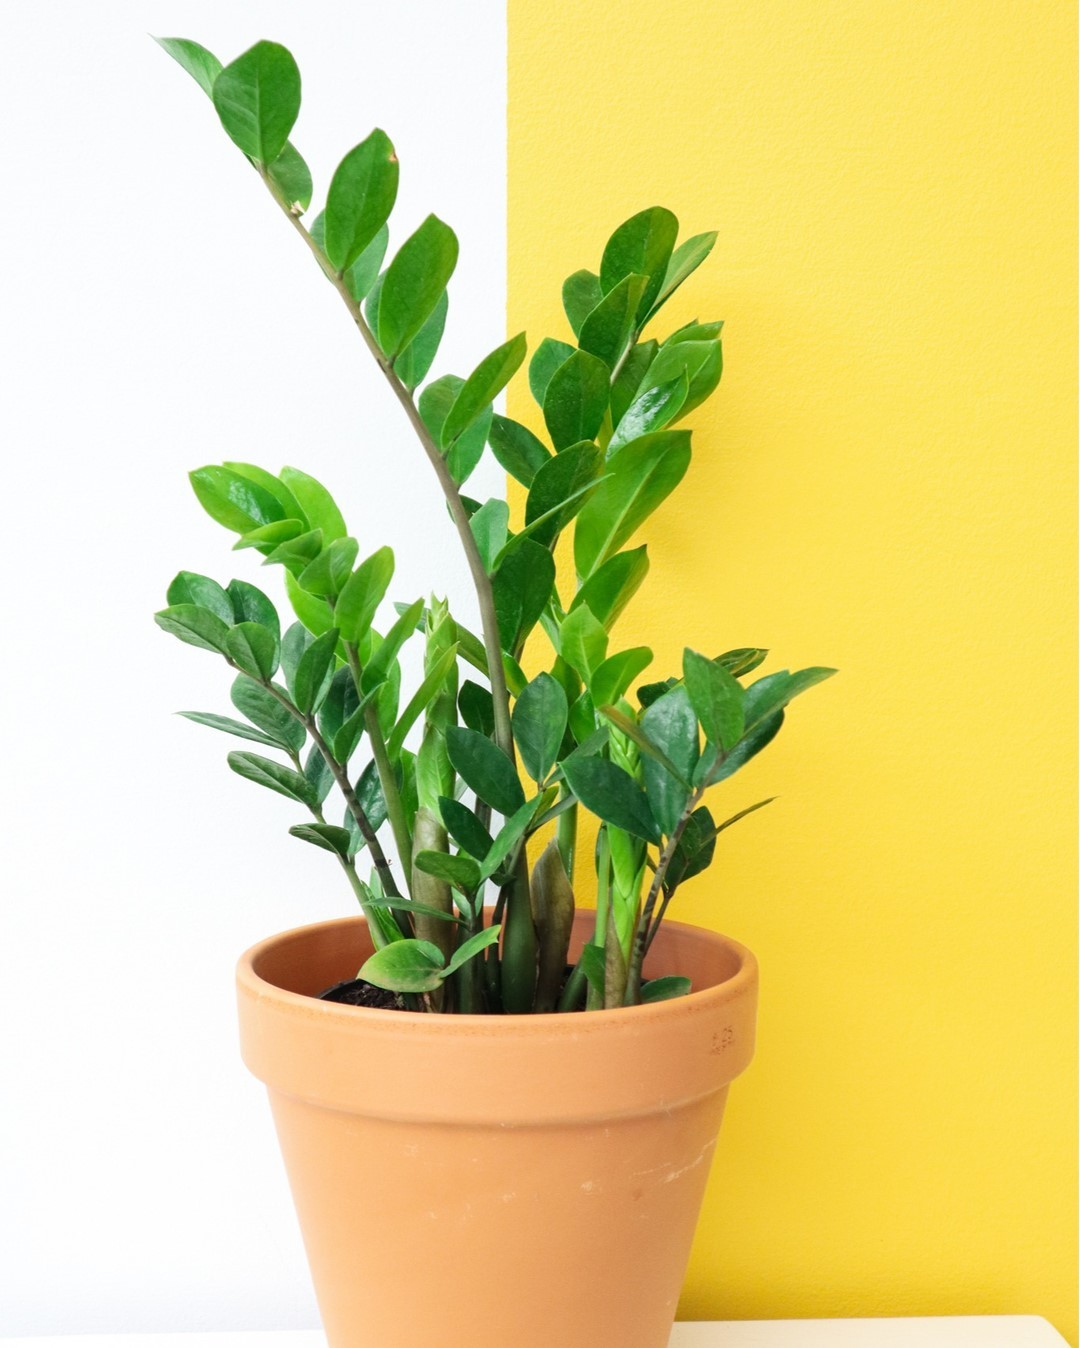 Product photo of growing ZZ plant. Photo by Instagram user @happylifeplants.